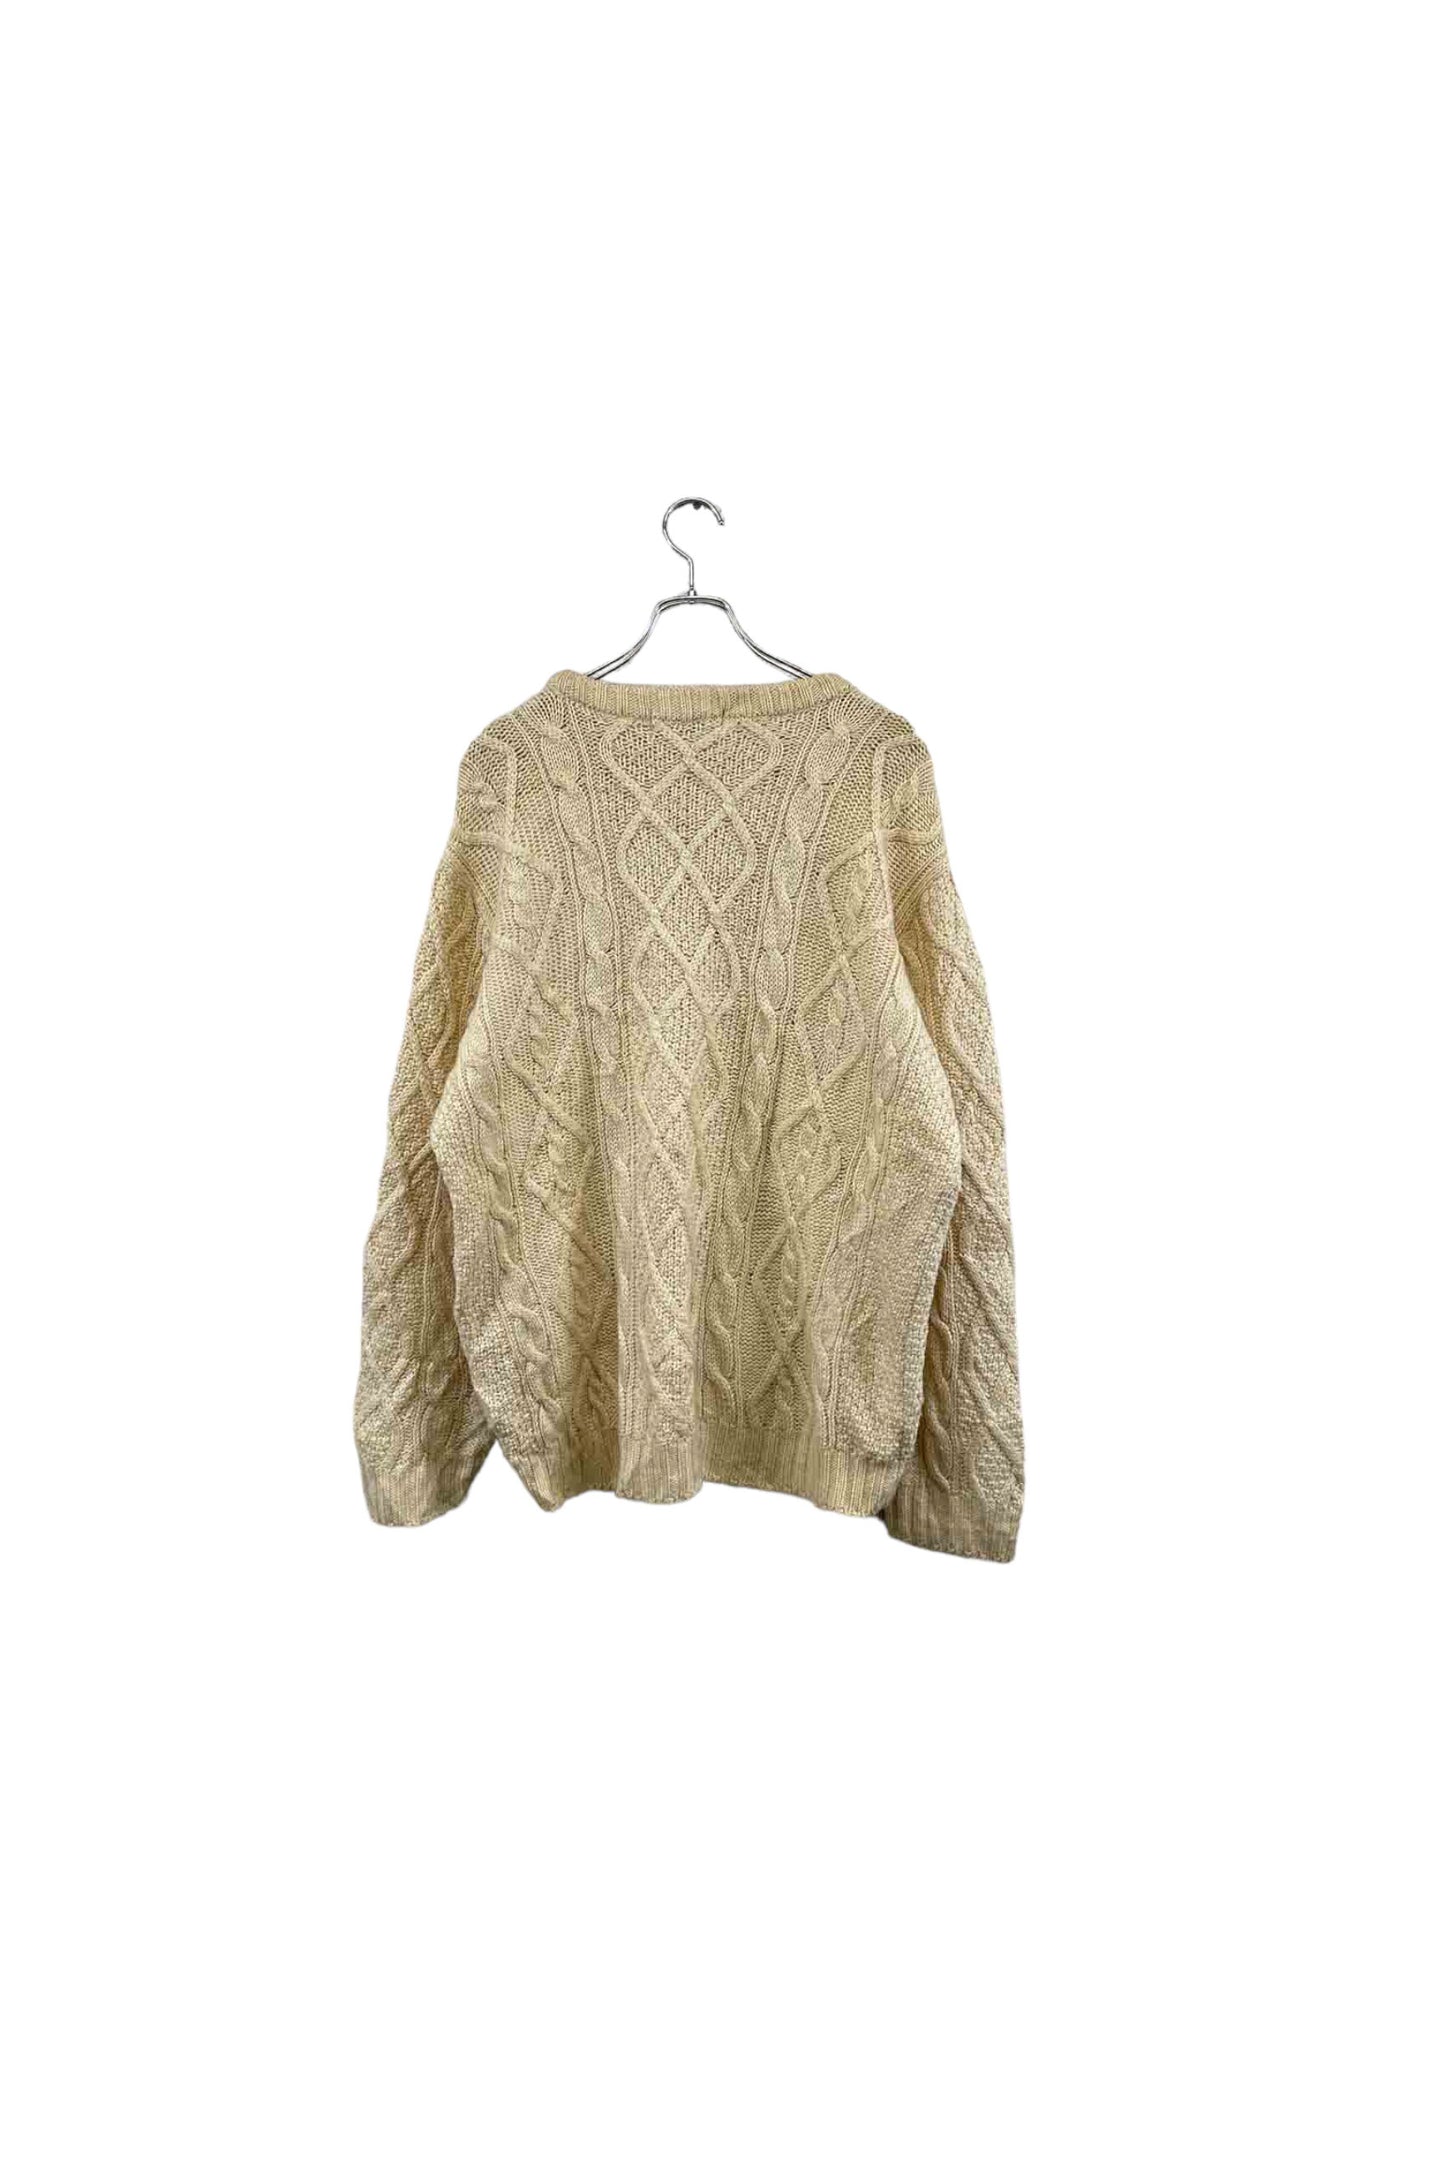 Made in THE UK MARKS&SPENCER sweater